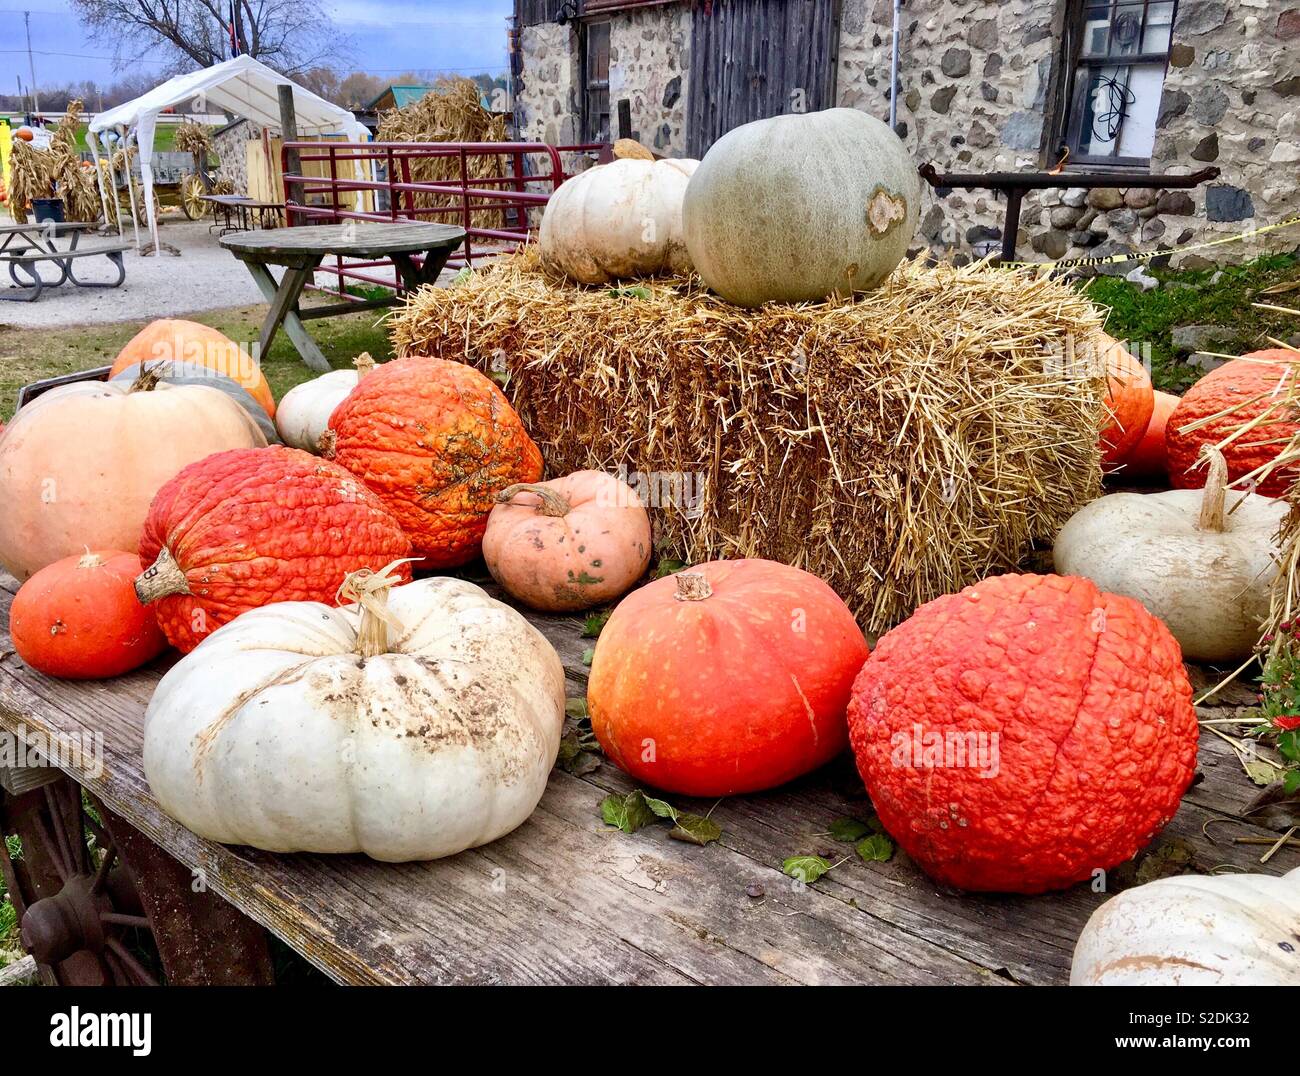 Various gourds, including white pumpkins, bright red pumpkins, and red wrinkly pumpkins on wagon with hay bales with old stone foundation farm Stock Photo